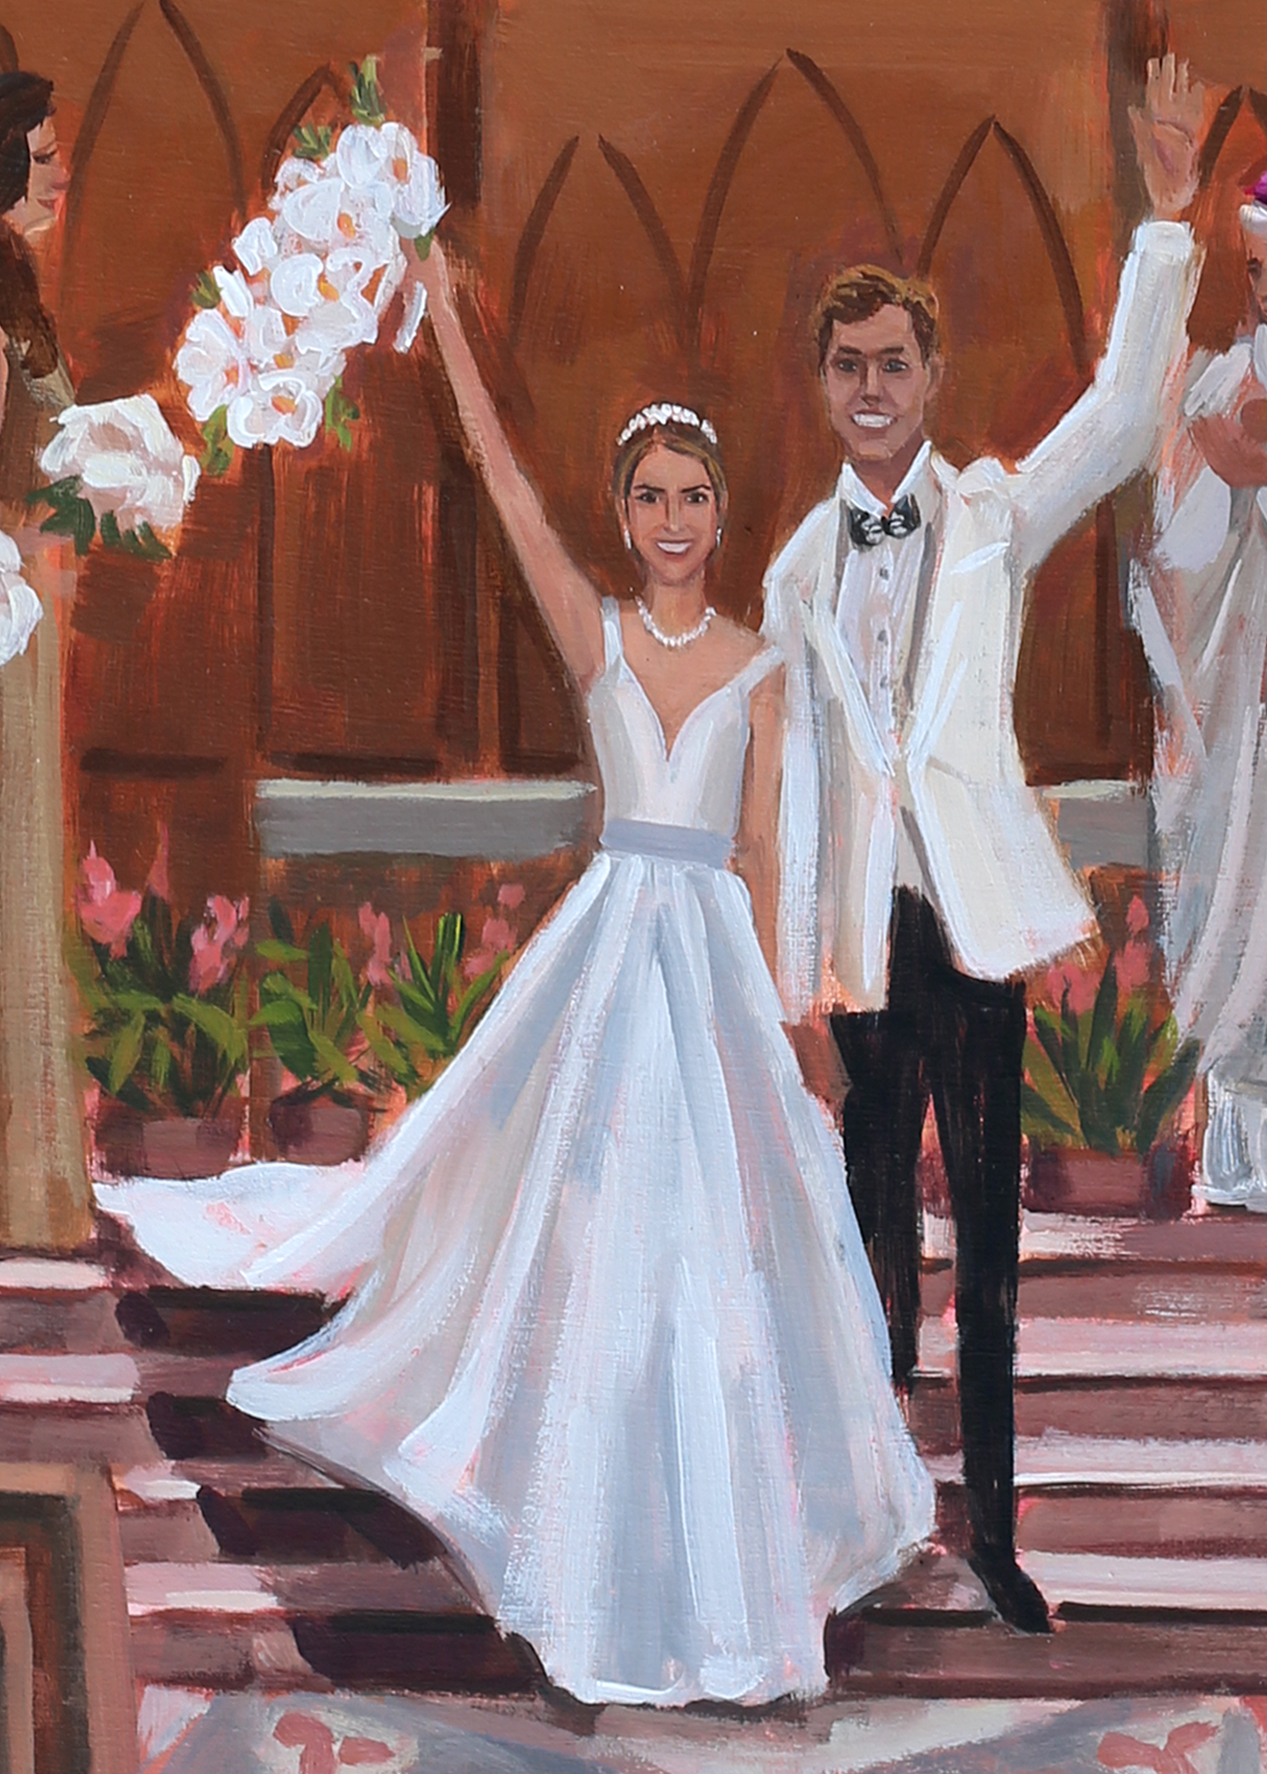 Close up of MC+M’s live wedding painting, created by Ben Keys of Wed on Canvas.